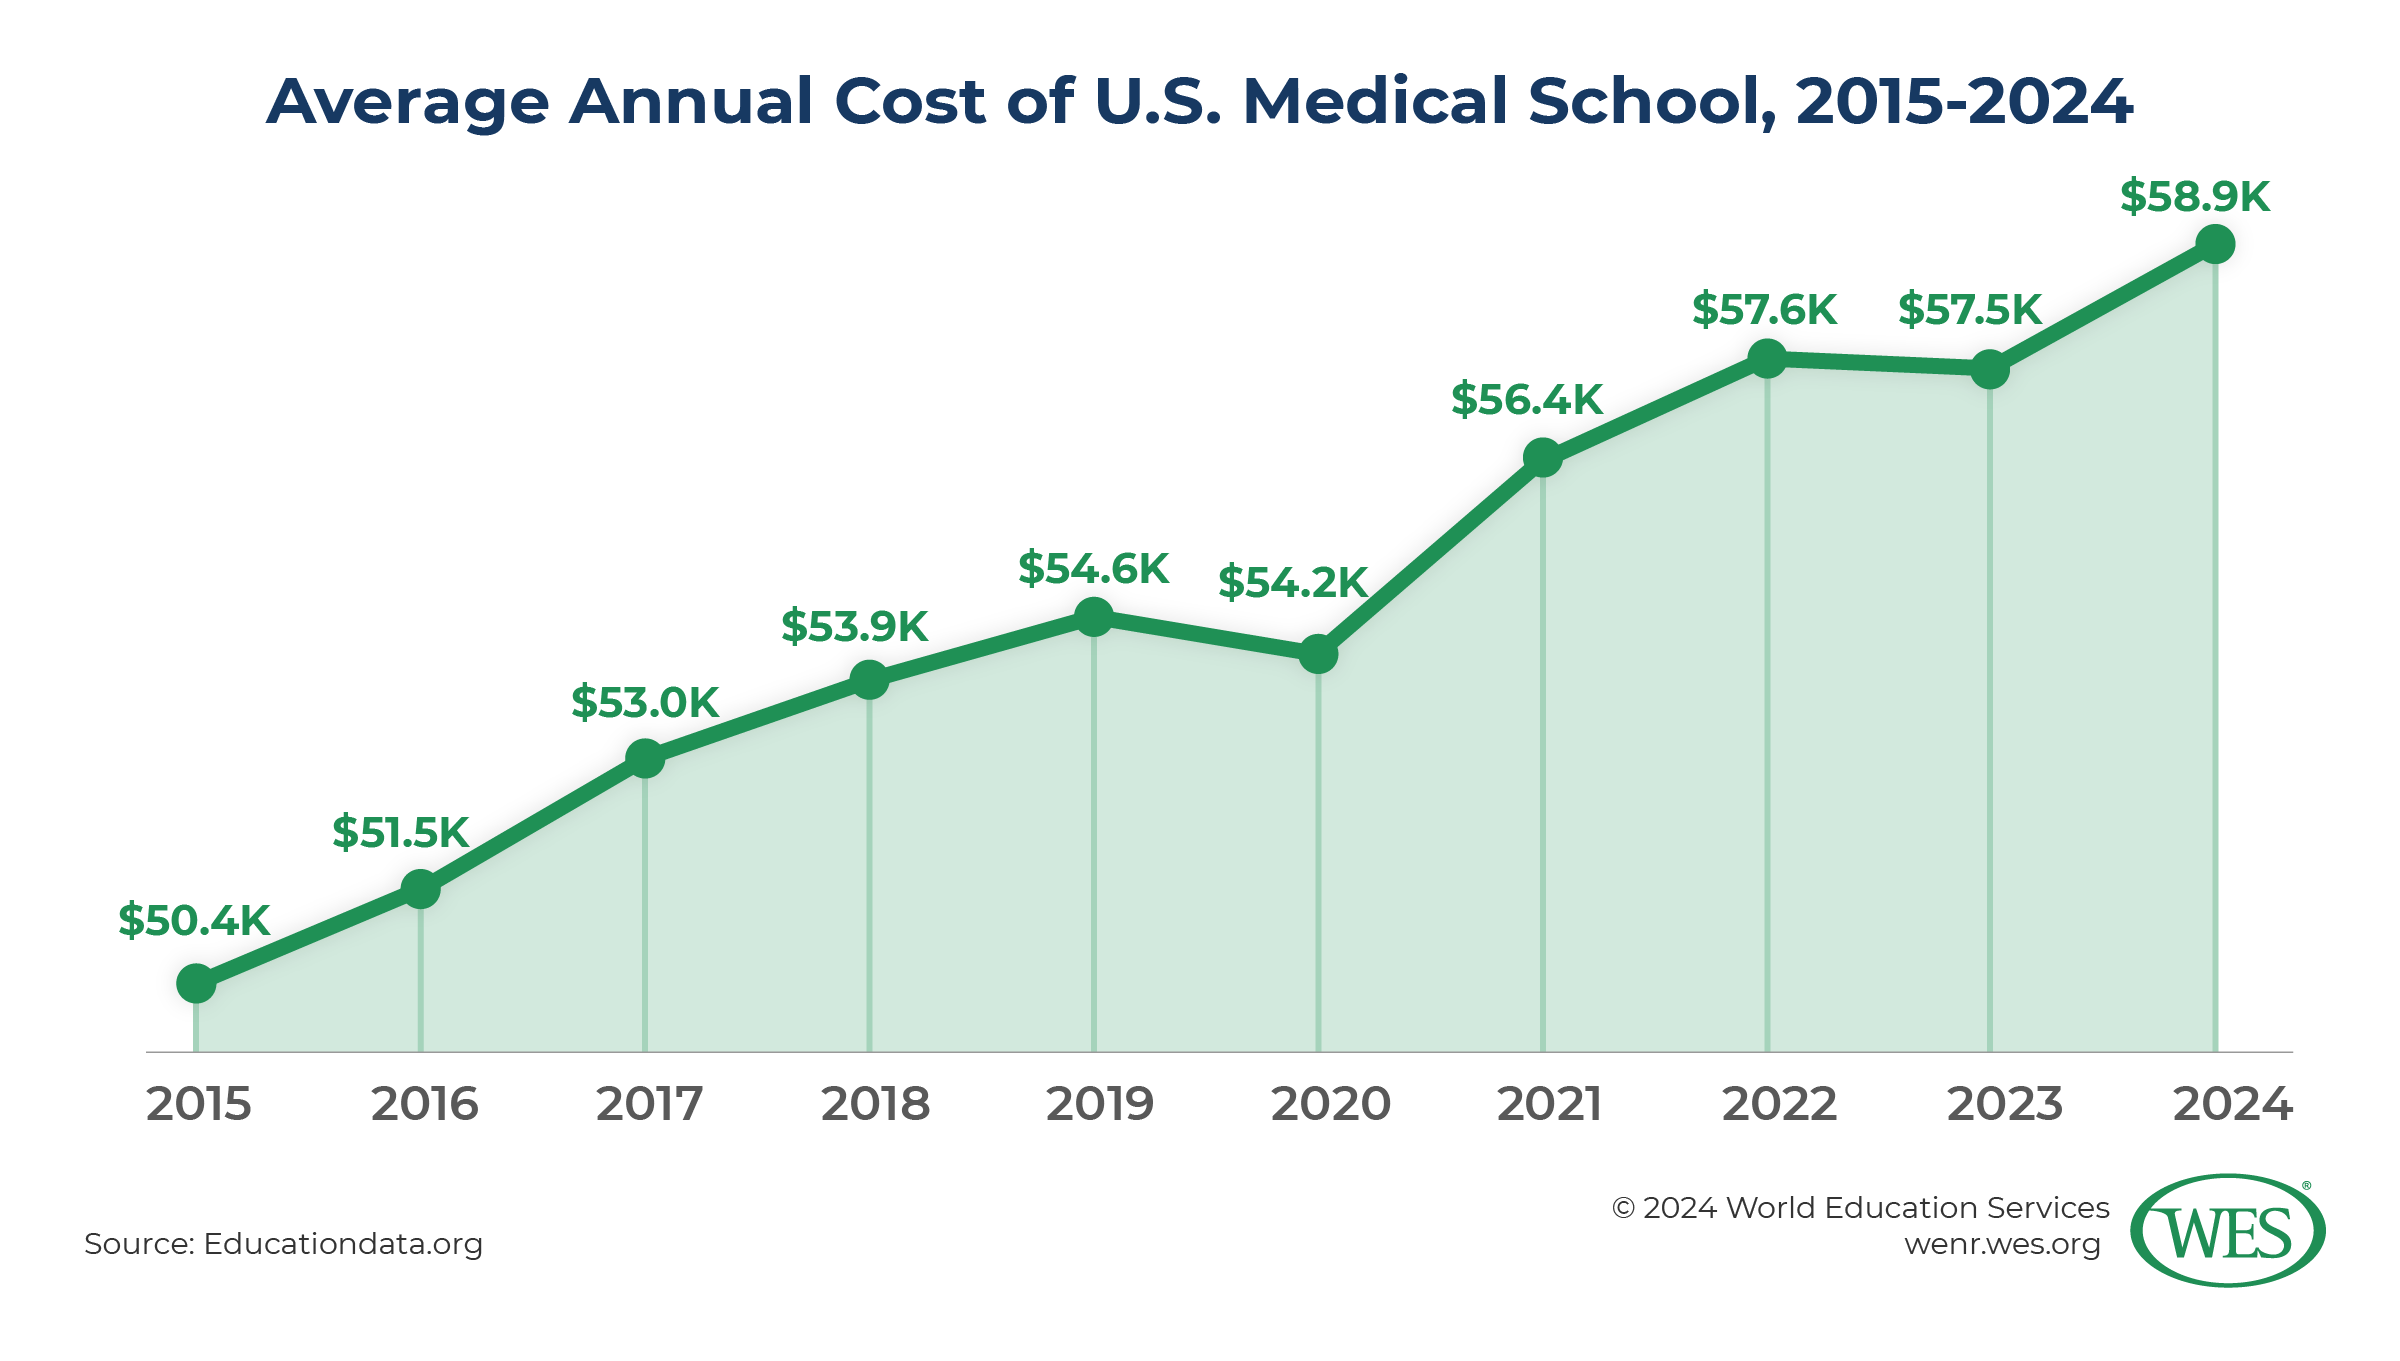 A chart showing the average annual cost of U.S. medical school between 2015 and 2024. 